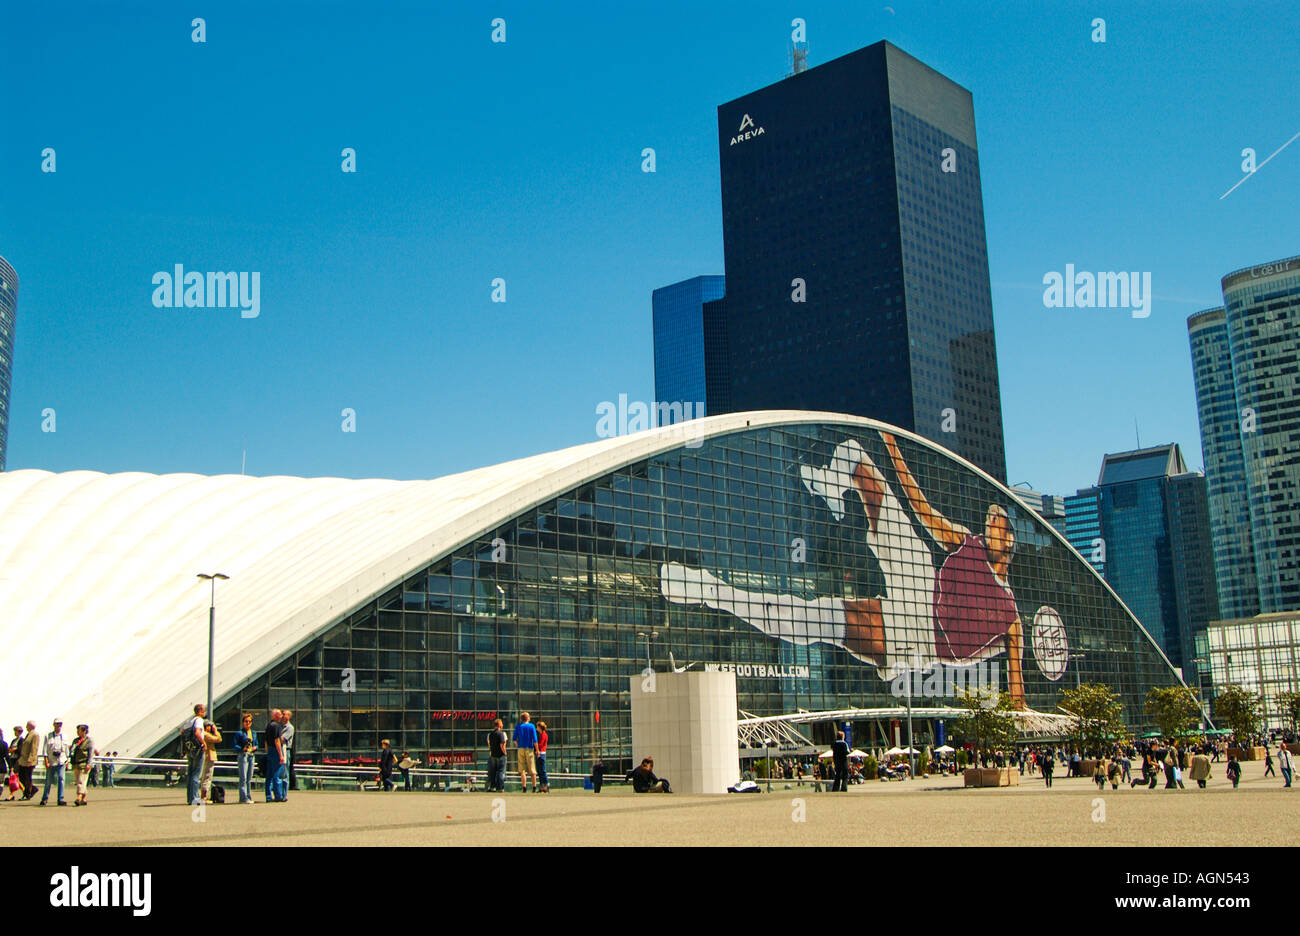 cnit paris la defense huge picture of thierry henry nike advertising Stock  Photo - Alamy